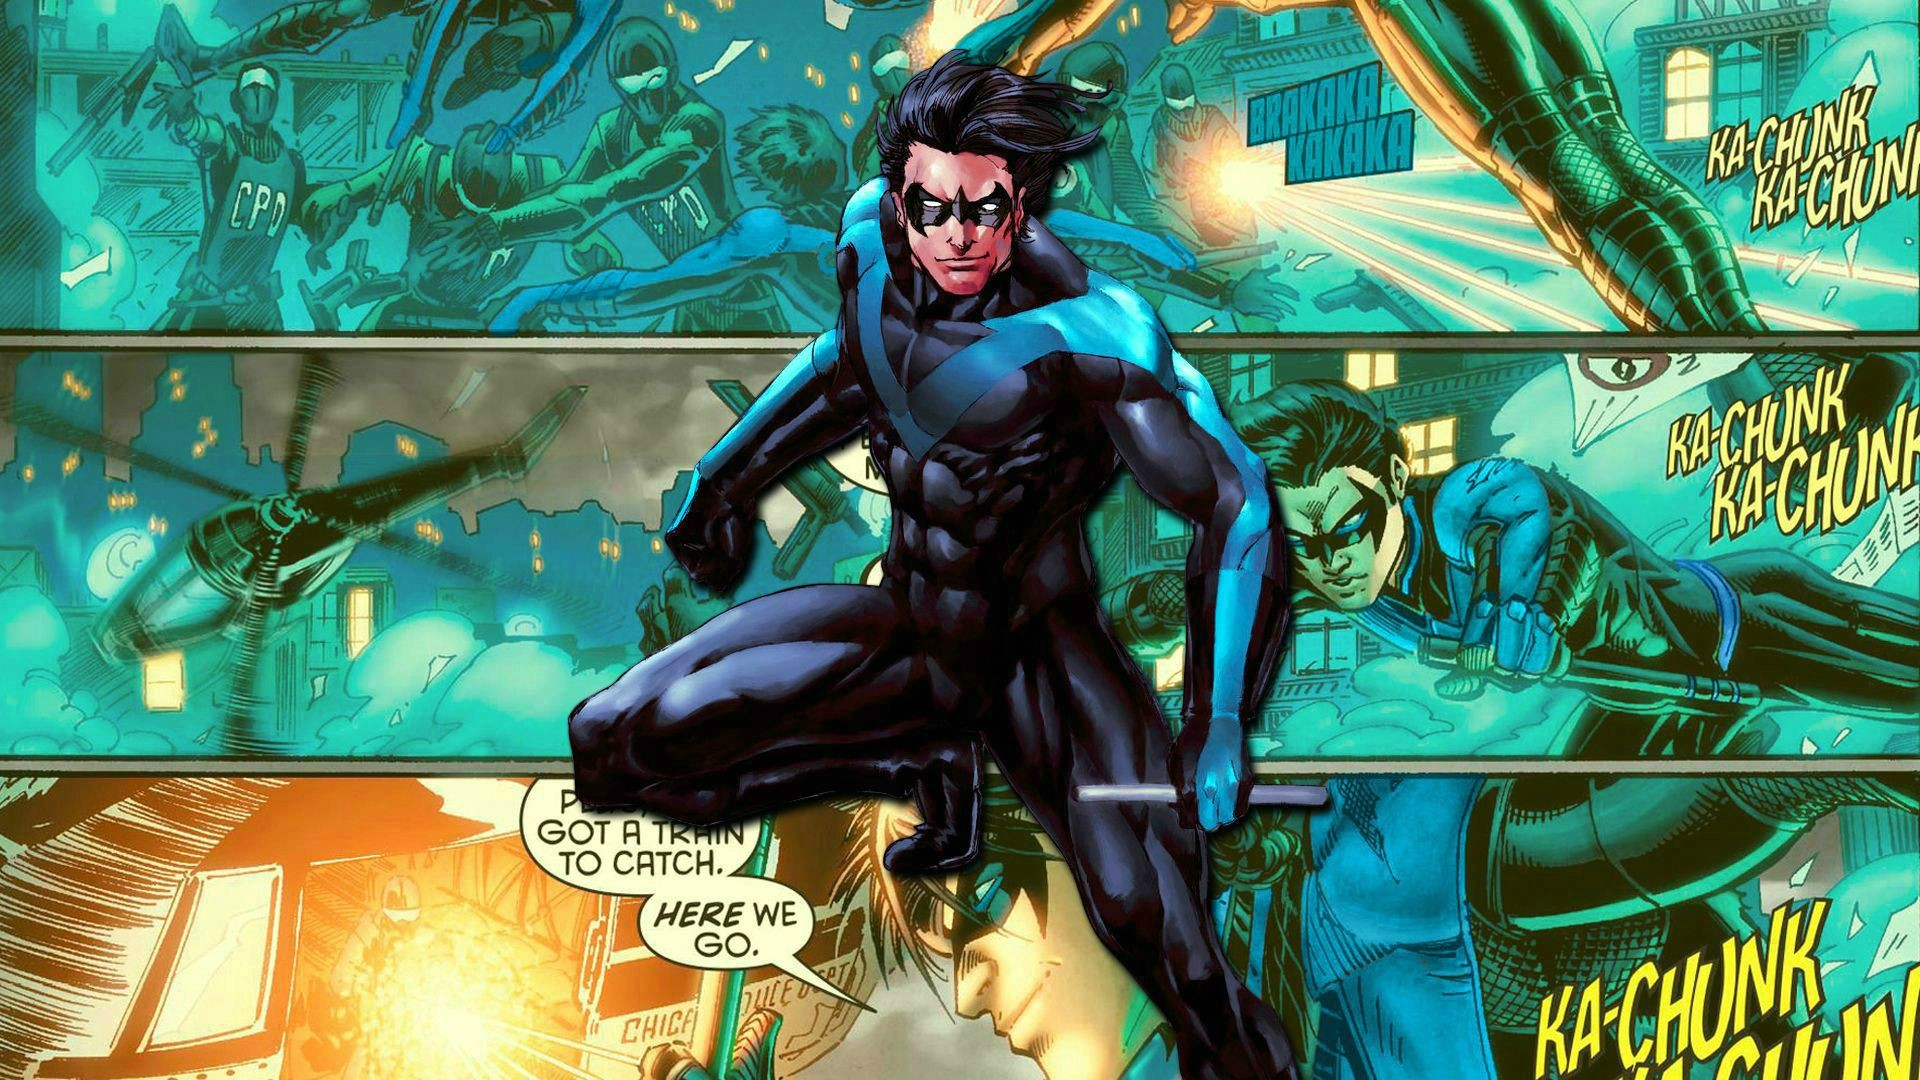 1920x1080 Nightwing HD Wallpapers Backgrounds Wallpaper Page | HD Wallpapers |  Pinterest | Nightwing, Hd wallpaper and Wallpaper